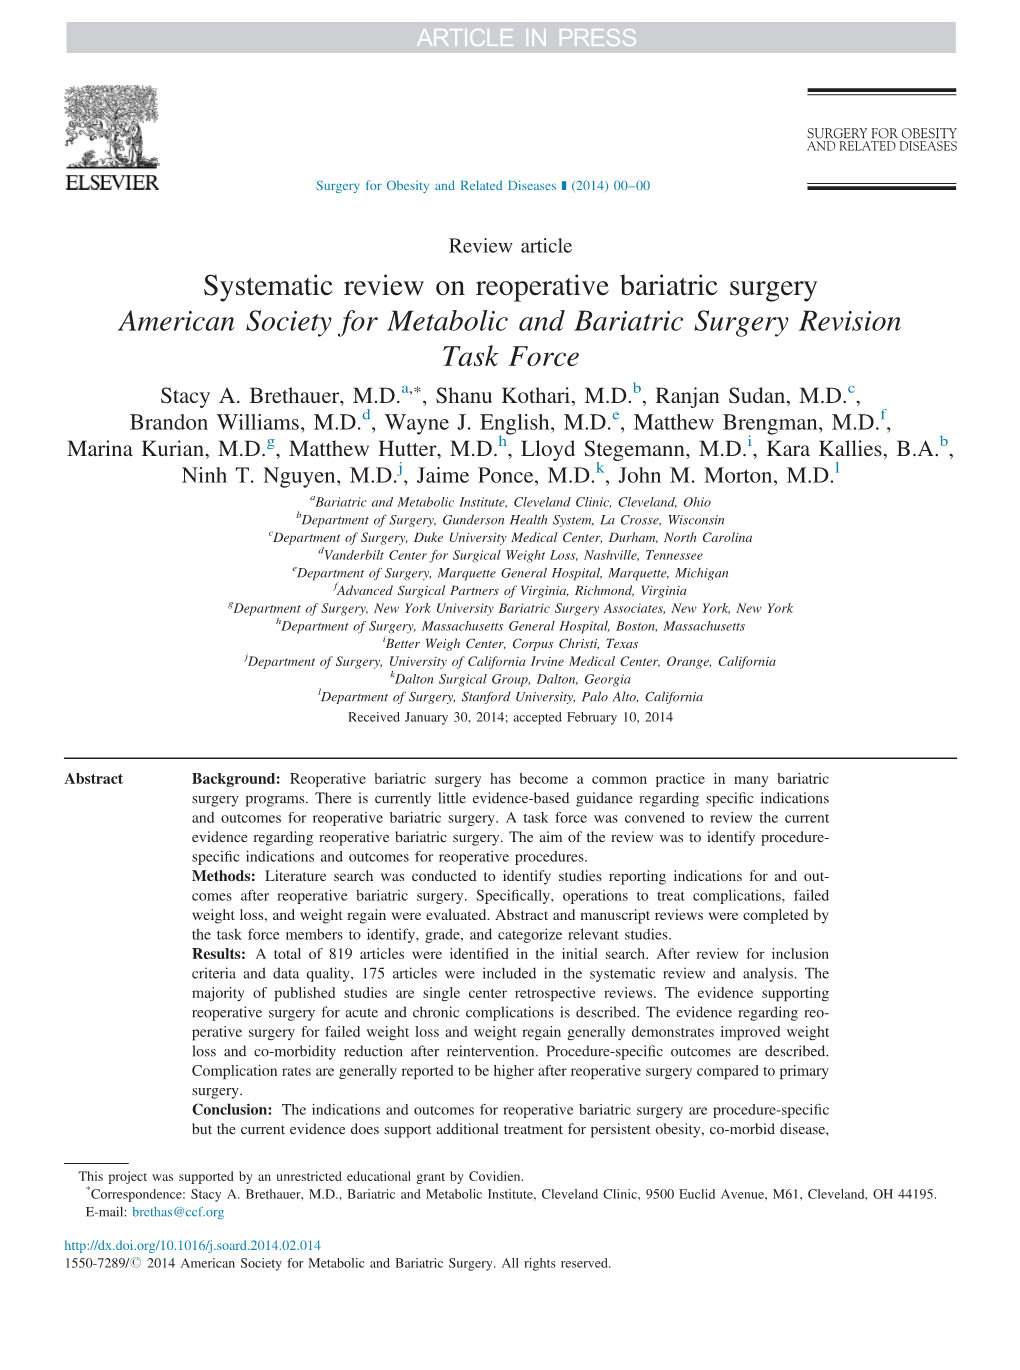 Systematic Review on Reoperative Bariatric Surgery American Society for Metabolic and Bariatric Surgery Revision Task Force Stacy A